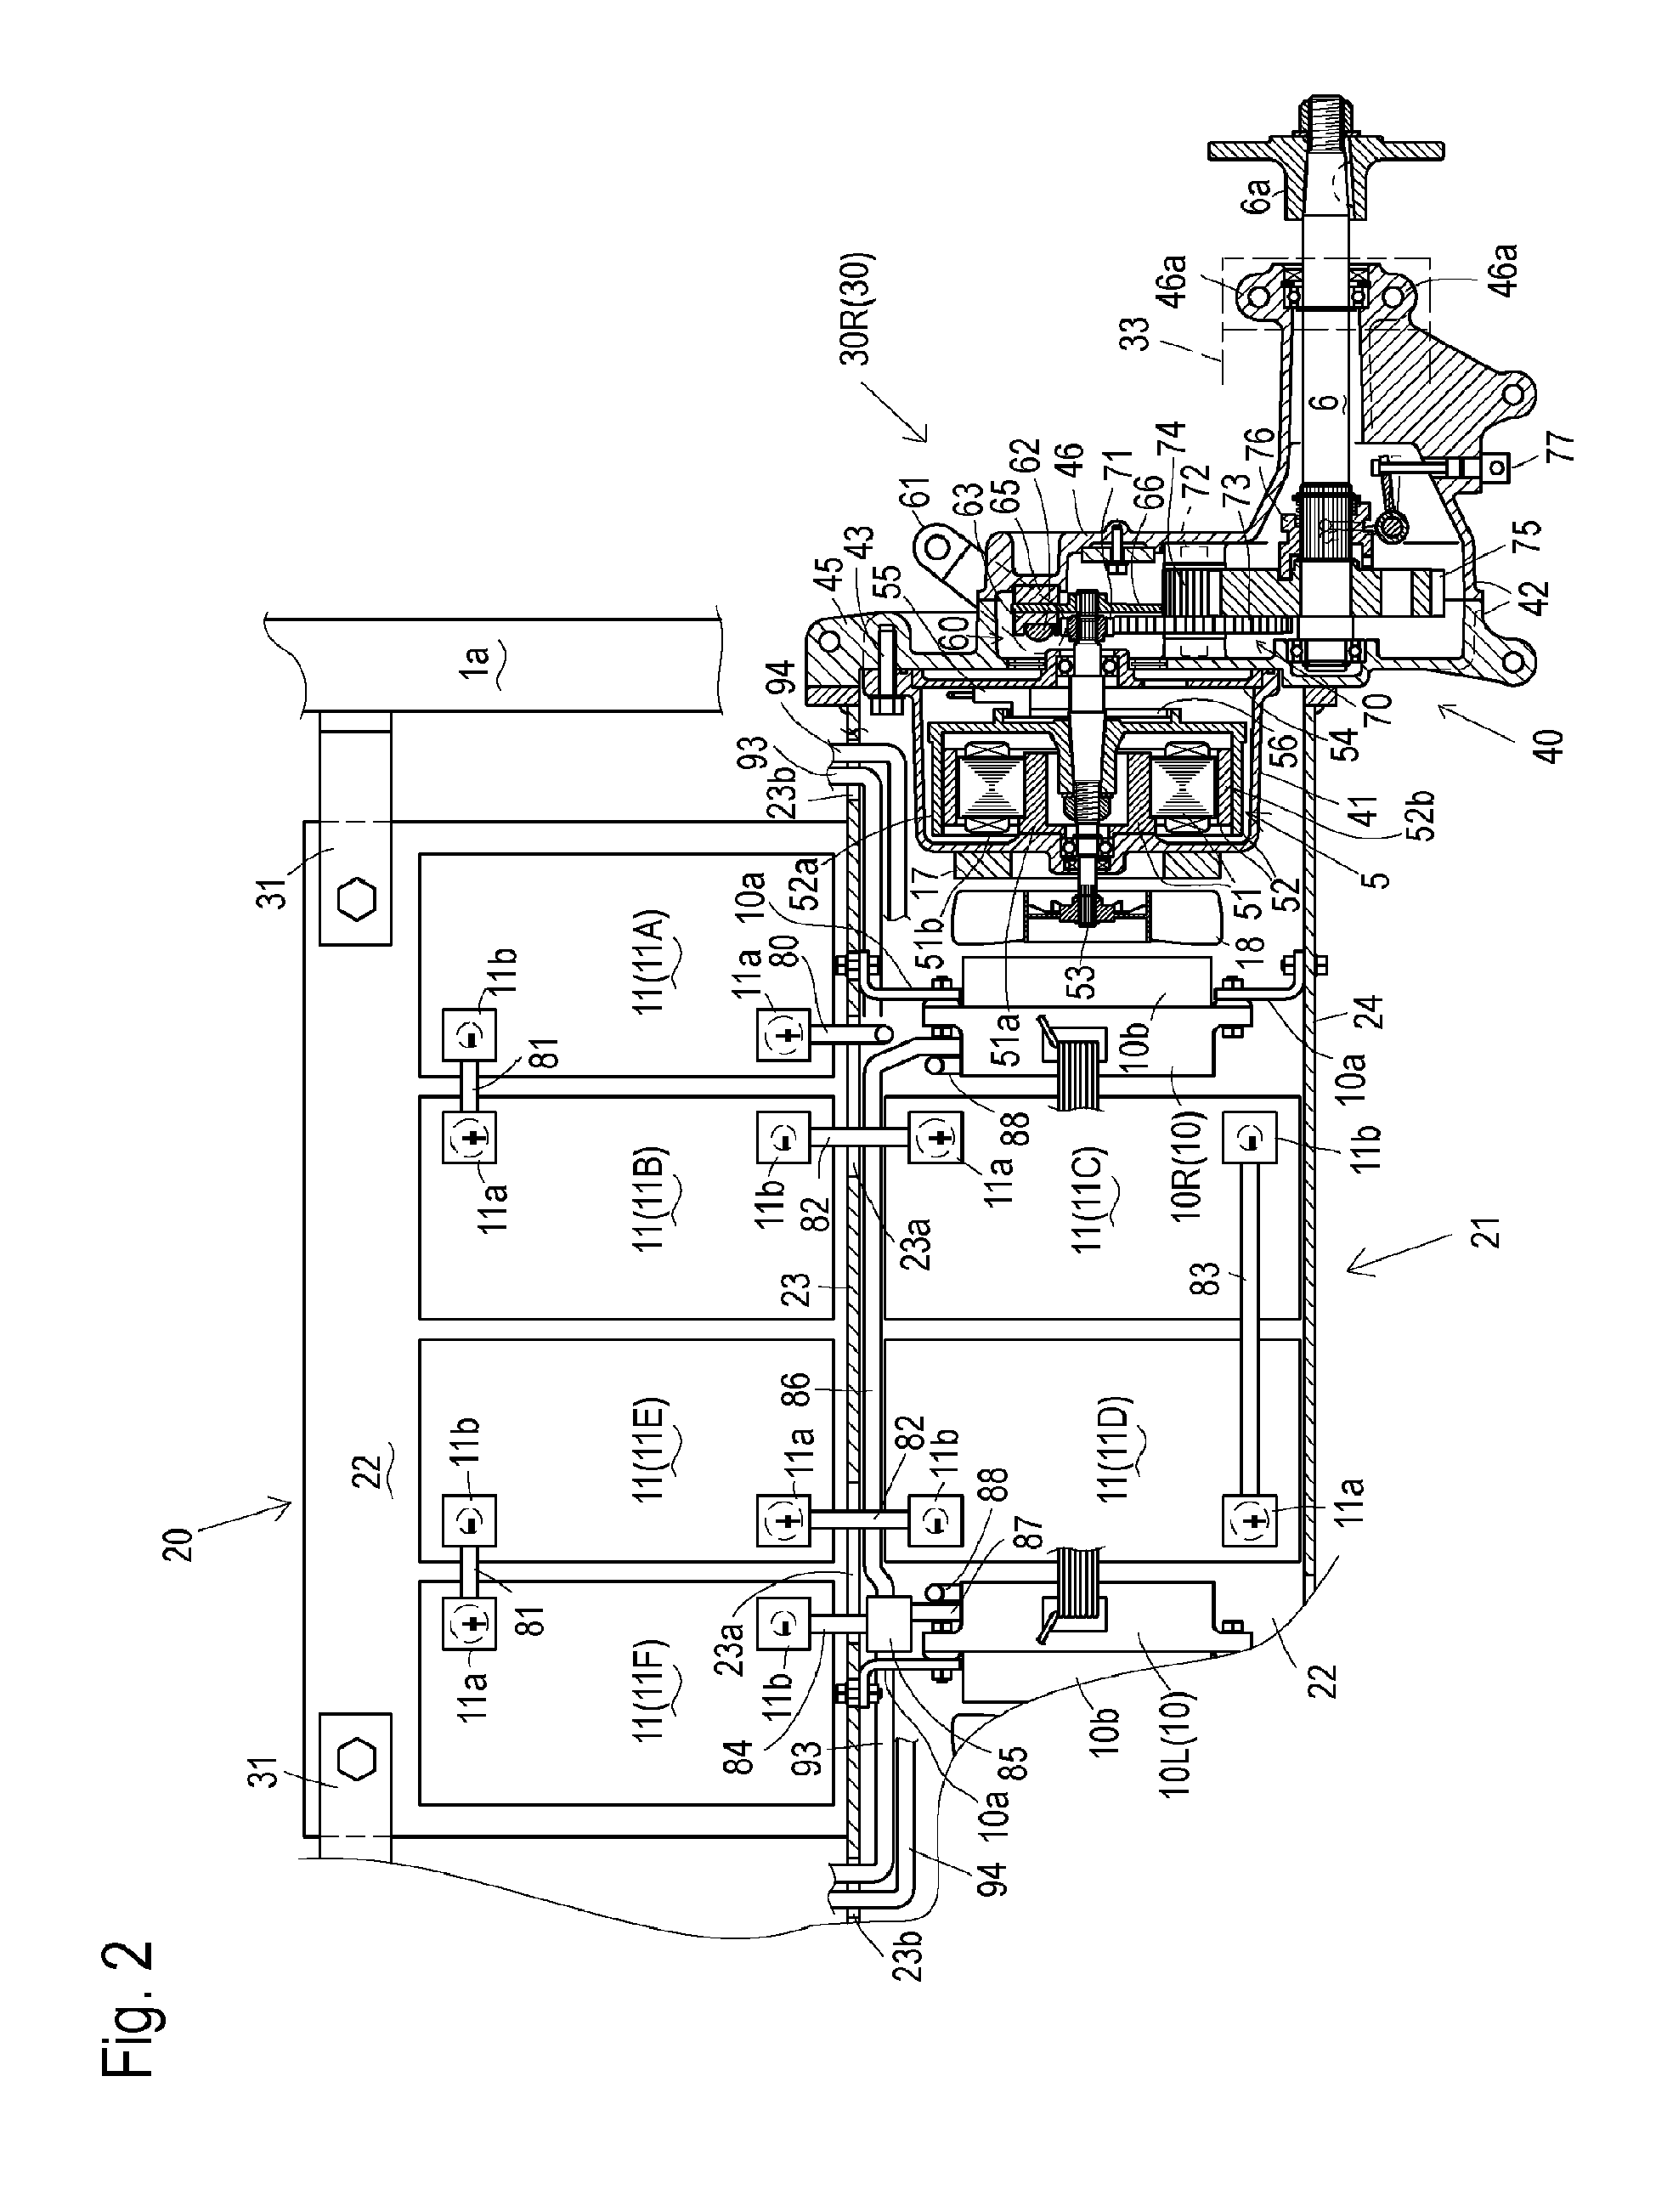 Electric lawn mower having a sub frame supporting transaxles and motor drivers